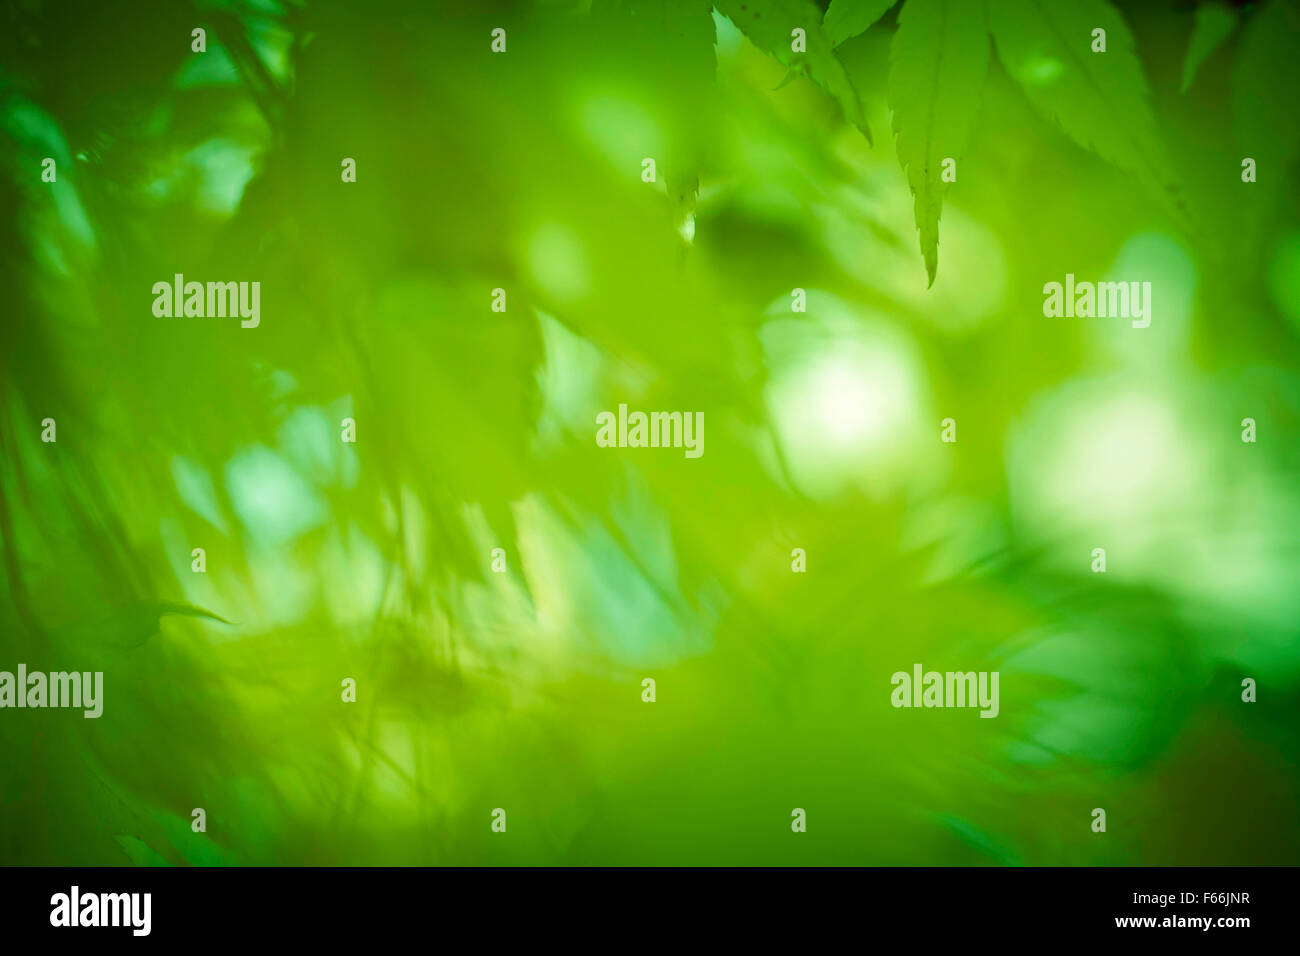 Abstract nature background with blurred green leaves Stock Photo